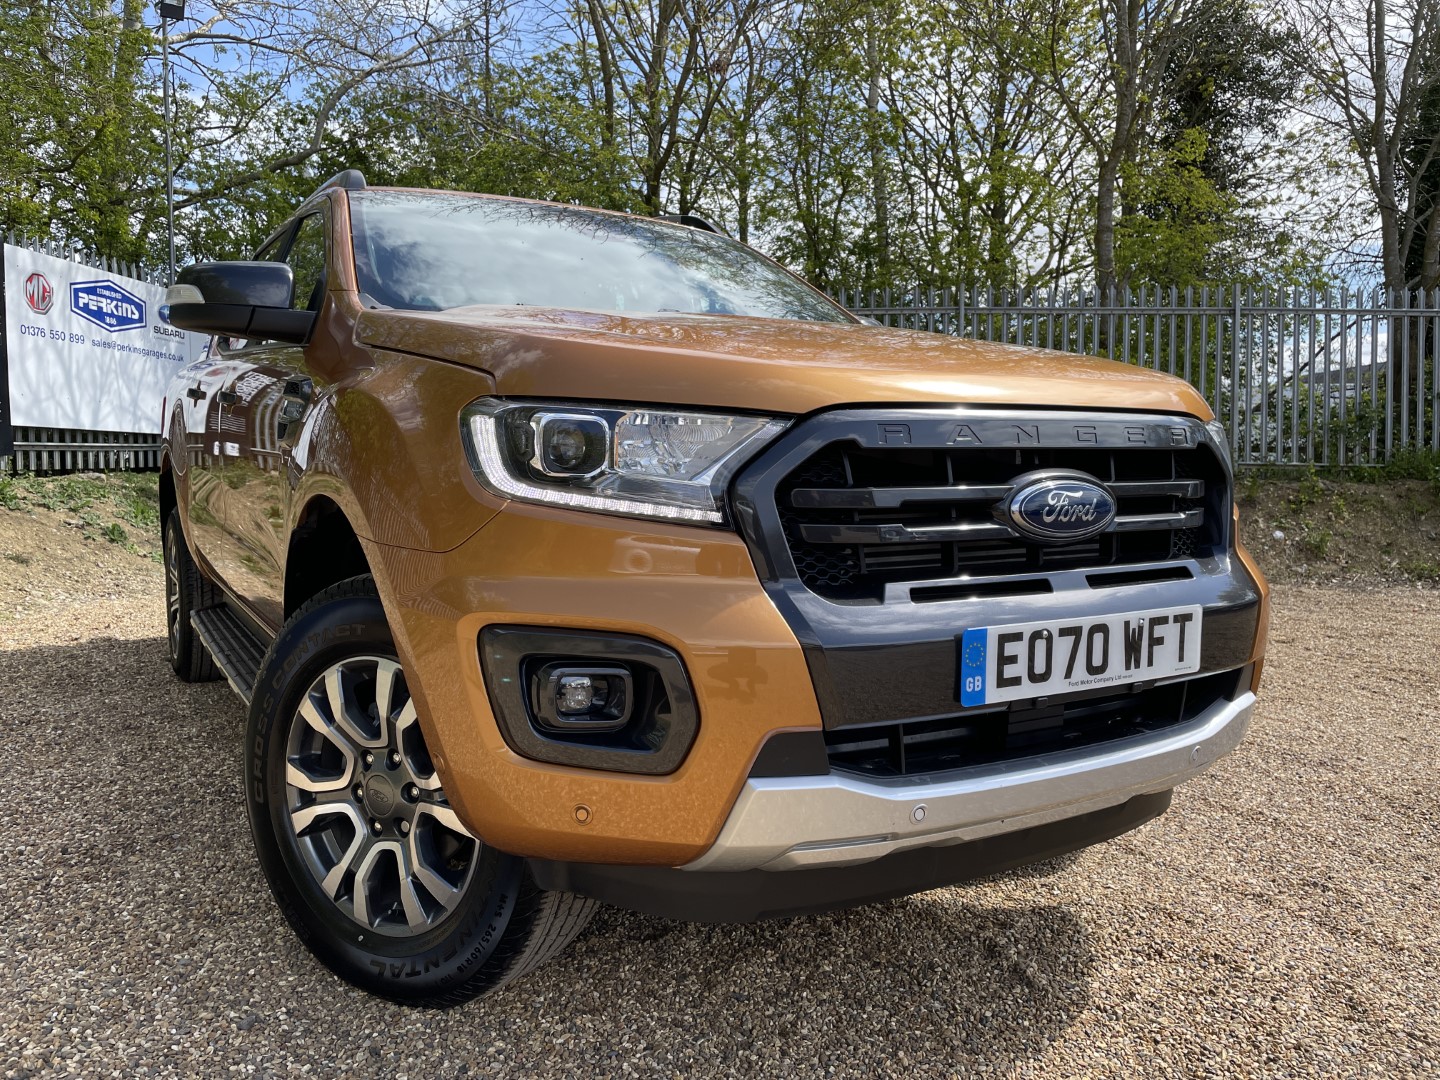 Used Ford Ranger Wildtrack for sale